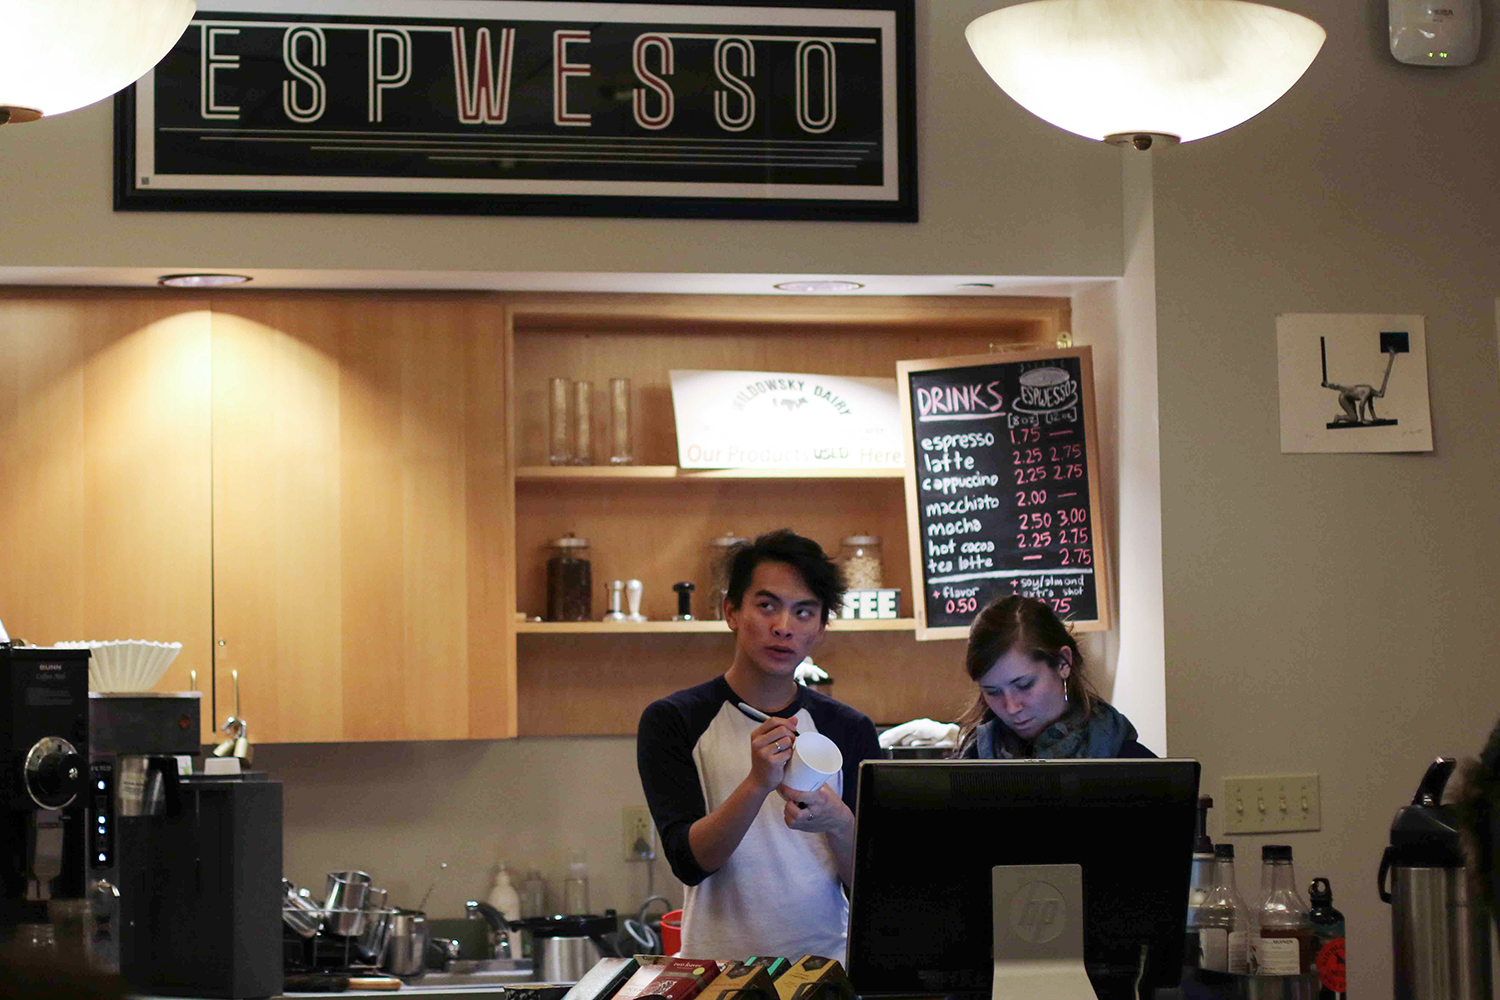 Emily Pfoutz '16 and Rick Manayan '17 busily make and distribute drinks at Espwesso, Wesleyan's student run cafe. 